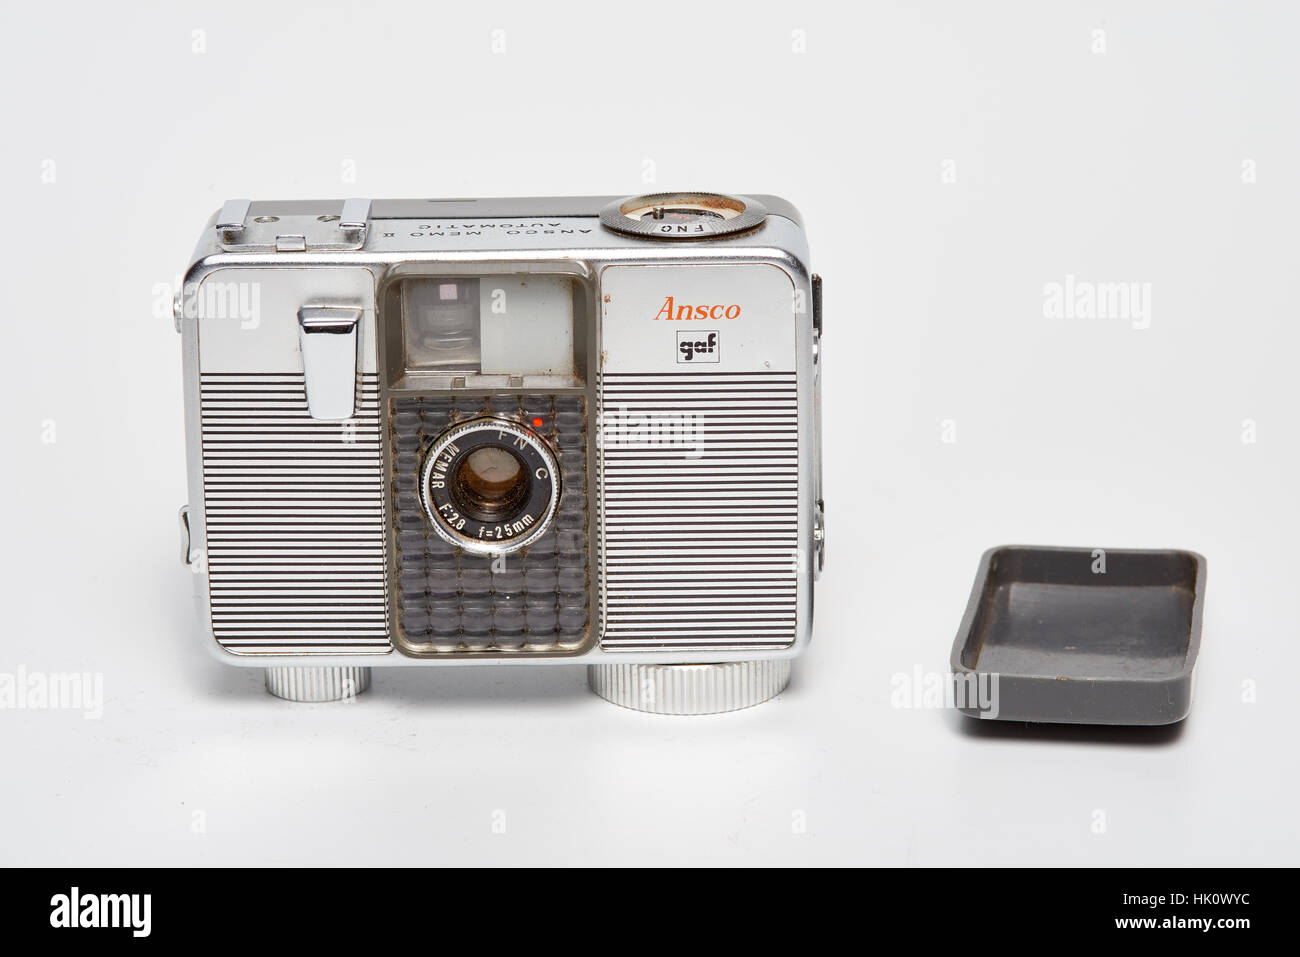 The Ansco Memo II Automatic is a 35mm half-frame camera introduced in 1967 by Ansco. The Memo II Automatic and the Ansco Memo Automatic from 1963 are  Stock Photo